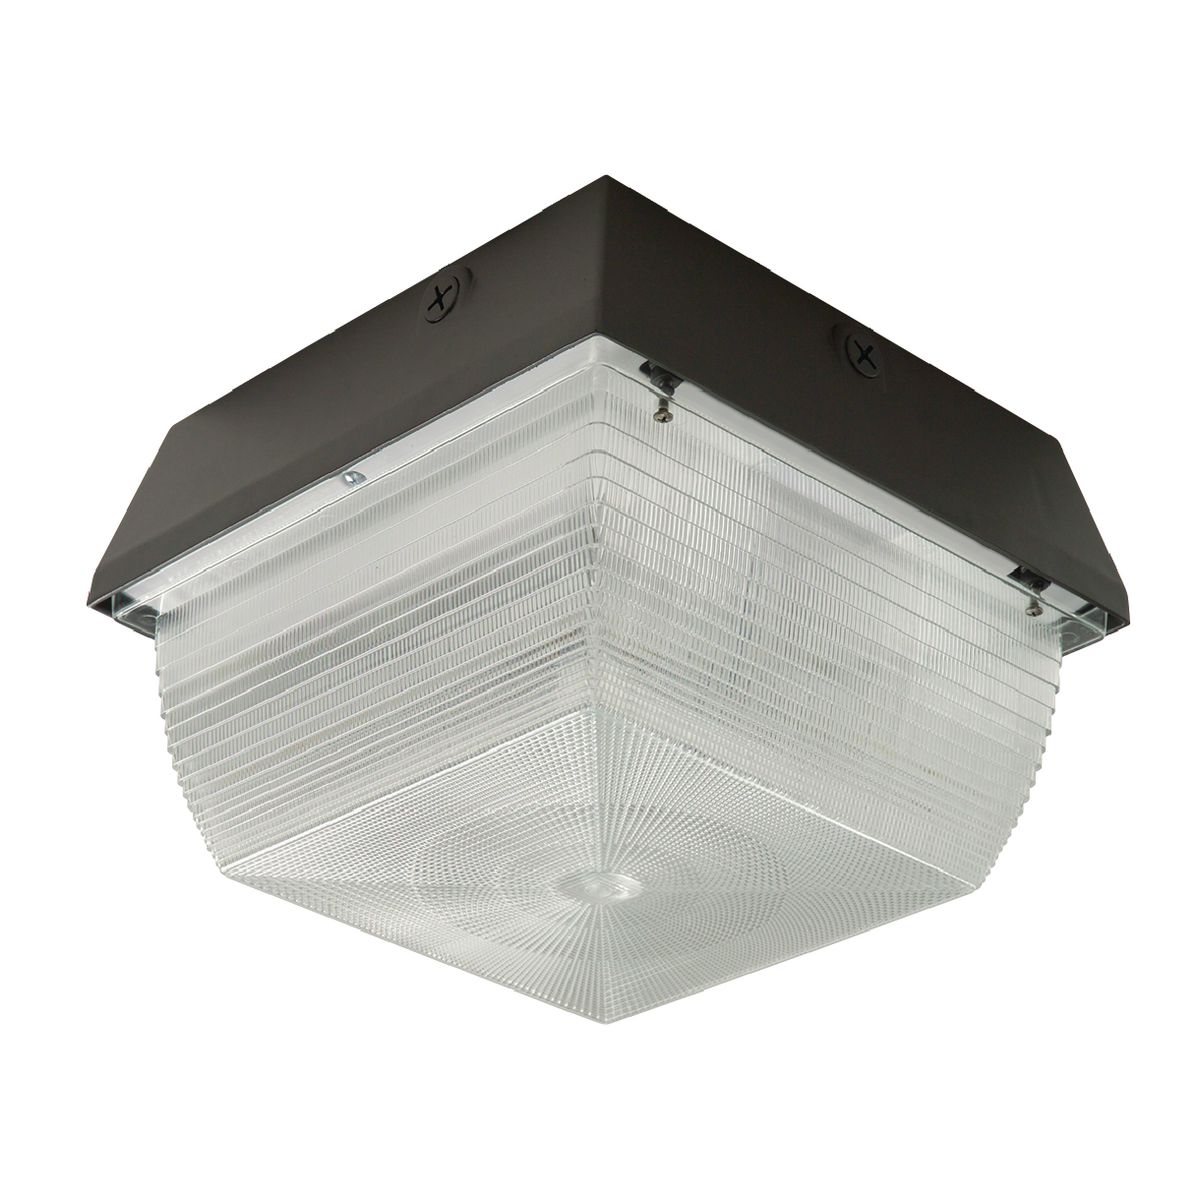 S9-70H, Lamp Type: Pulse Start Metal Halide, Lamp Included: Yes, Lens Type: Vandal resistant prismatic polycarbonate refractor, Mounting Height: 8-15 ft, Wattage: 70 W, Voltage Rating: 120,208,240,277 V, Light Distribution: Symmetric, Color: Bronze.